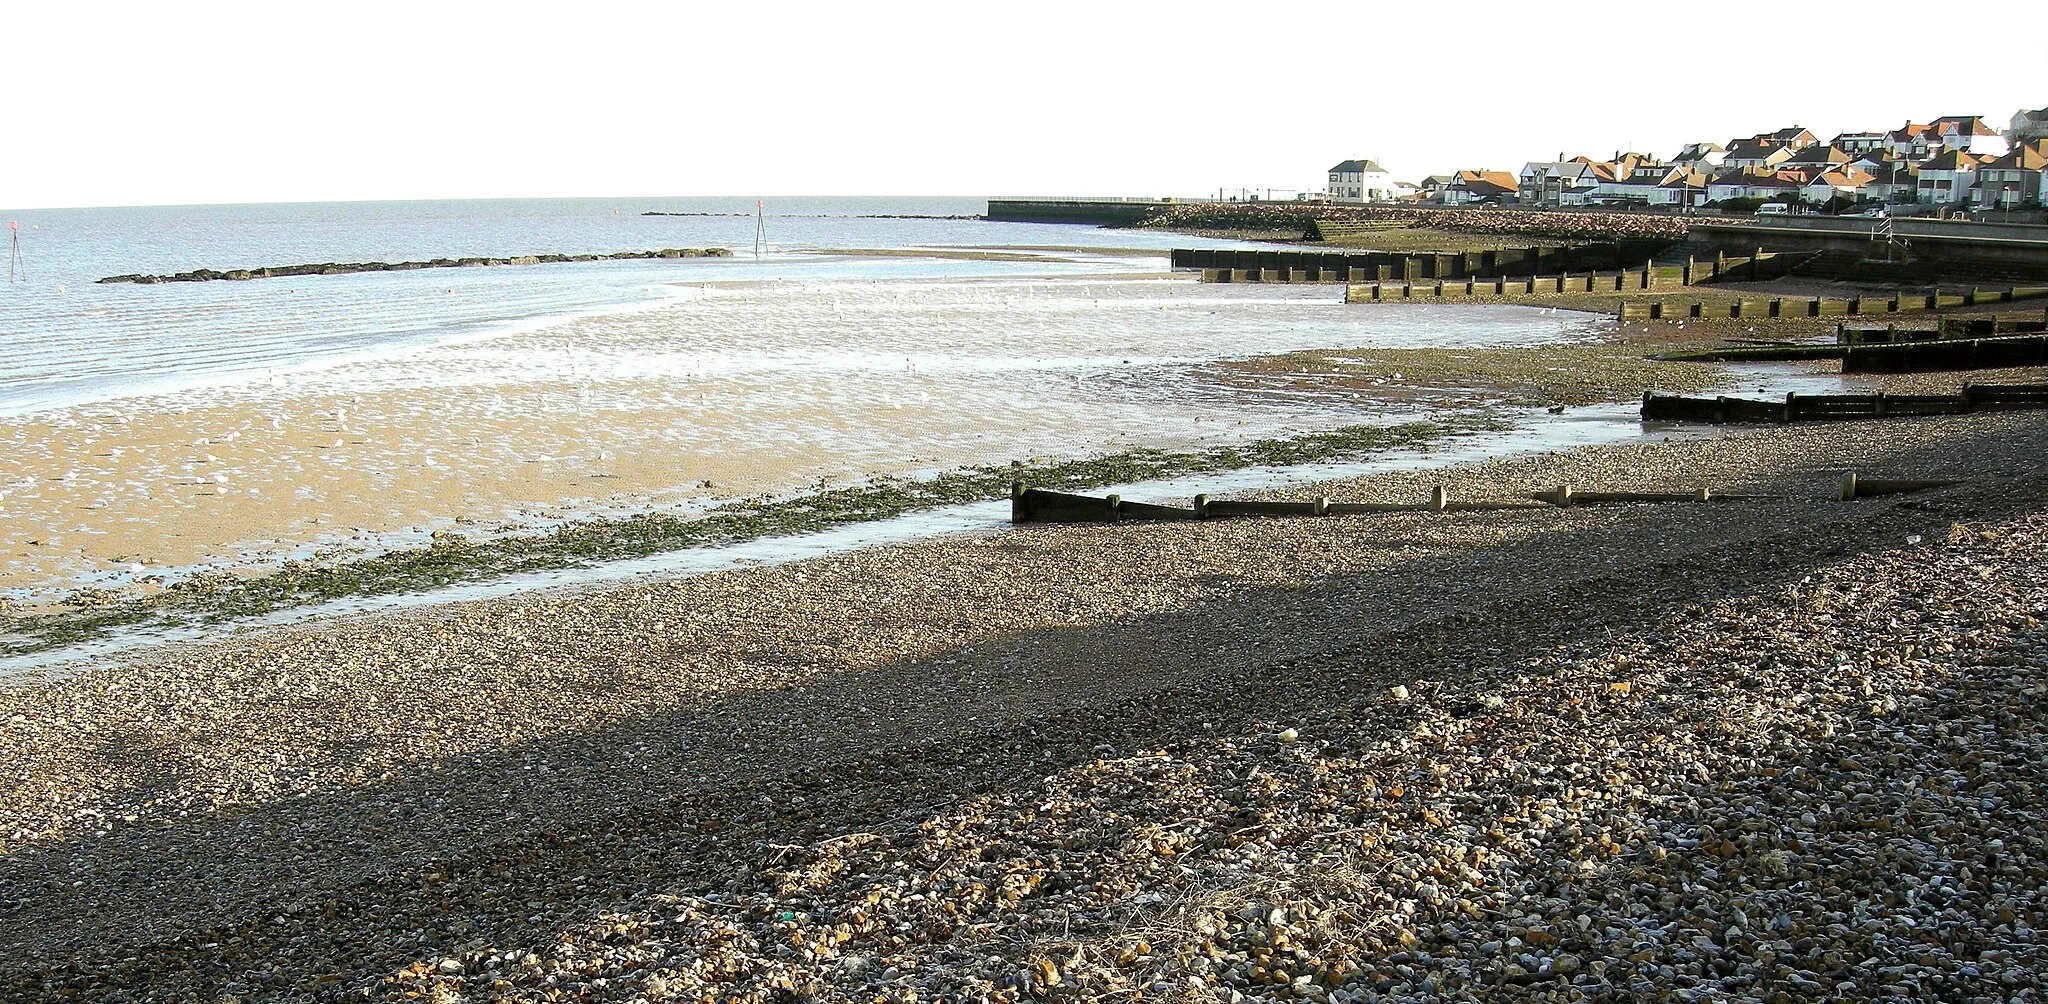 Photo showing: Site of abandoned and drowned village Hampton-on-Sea, Herne Bay, Kent, England. Source of identification of site: Martin Easdown, Adventures in Oysterville, (Michael's Bookshop, Ramsgate, 2008)